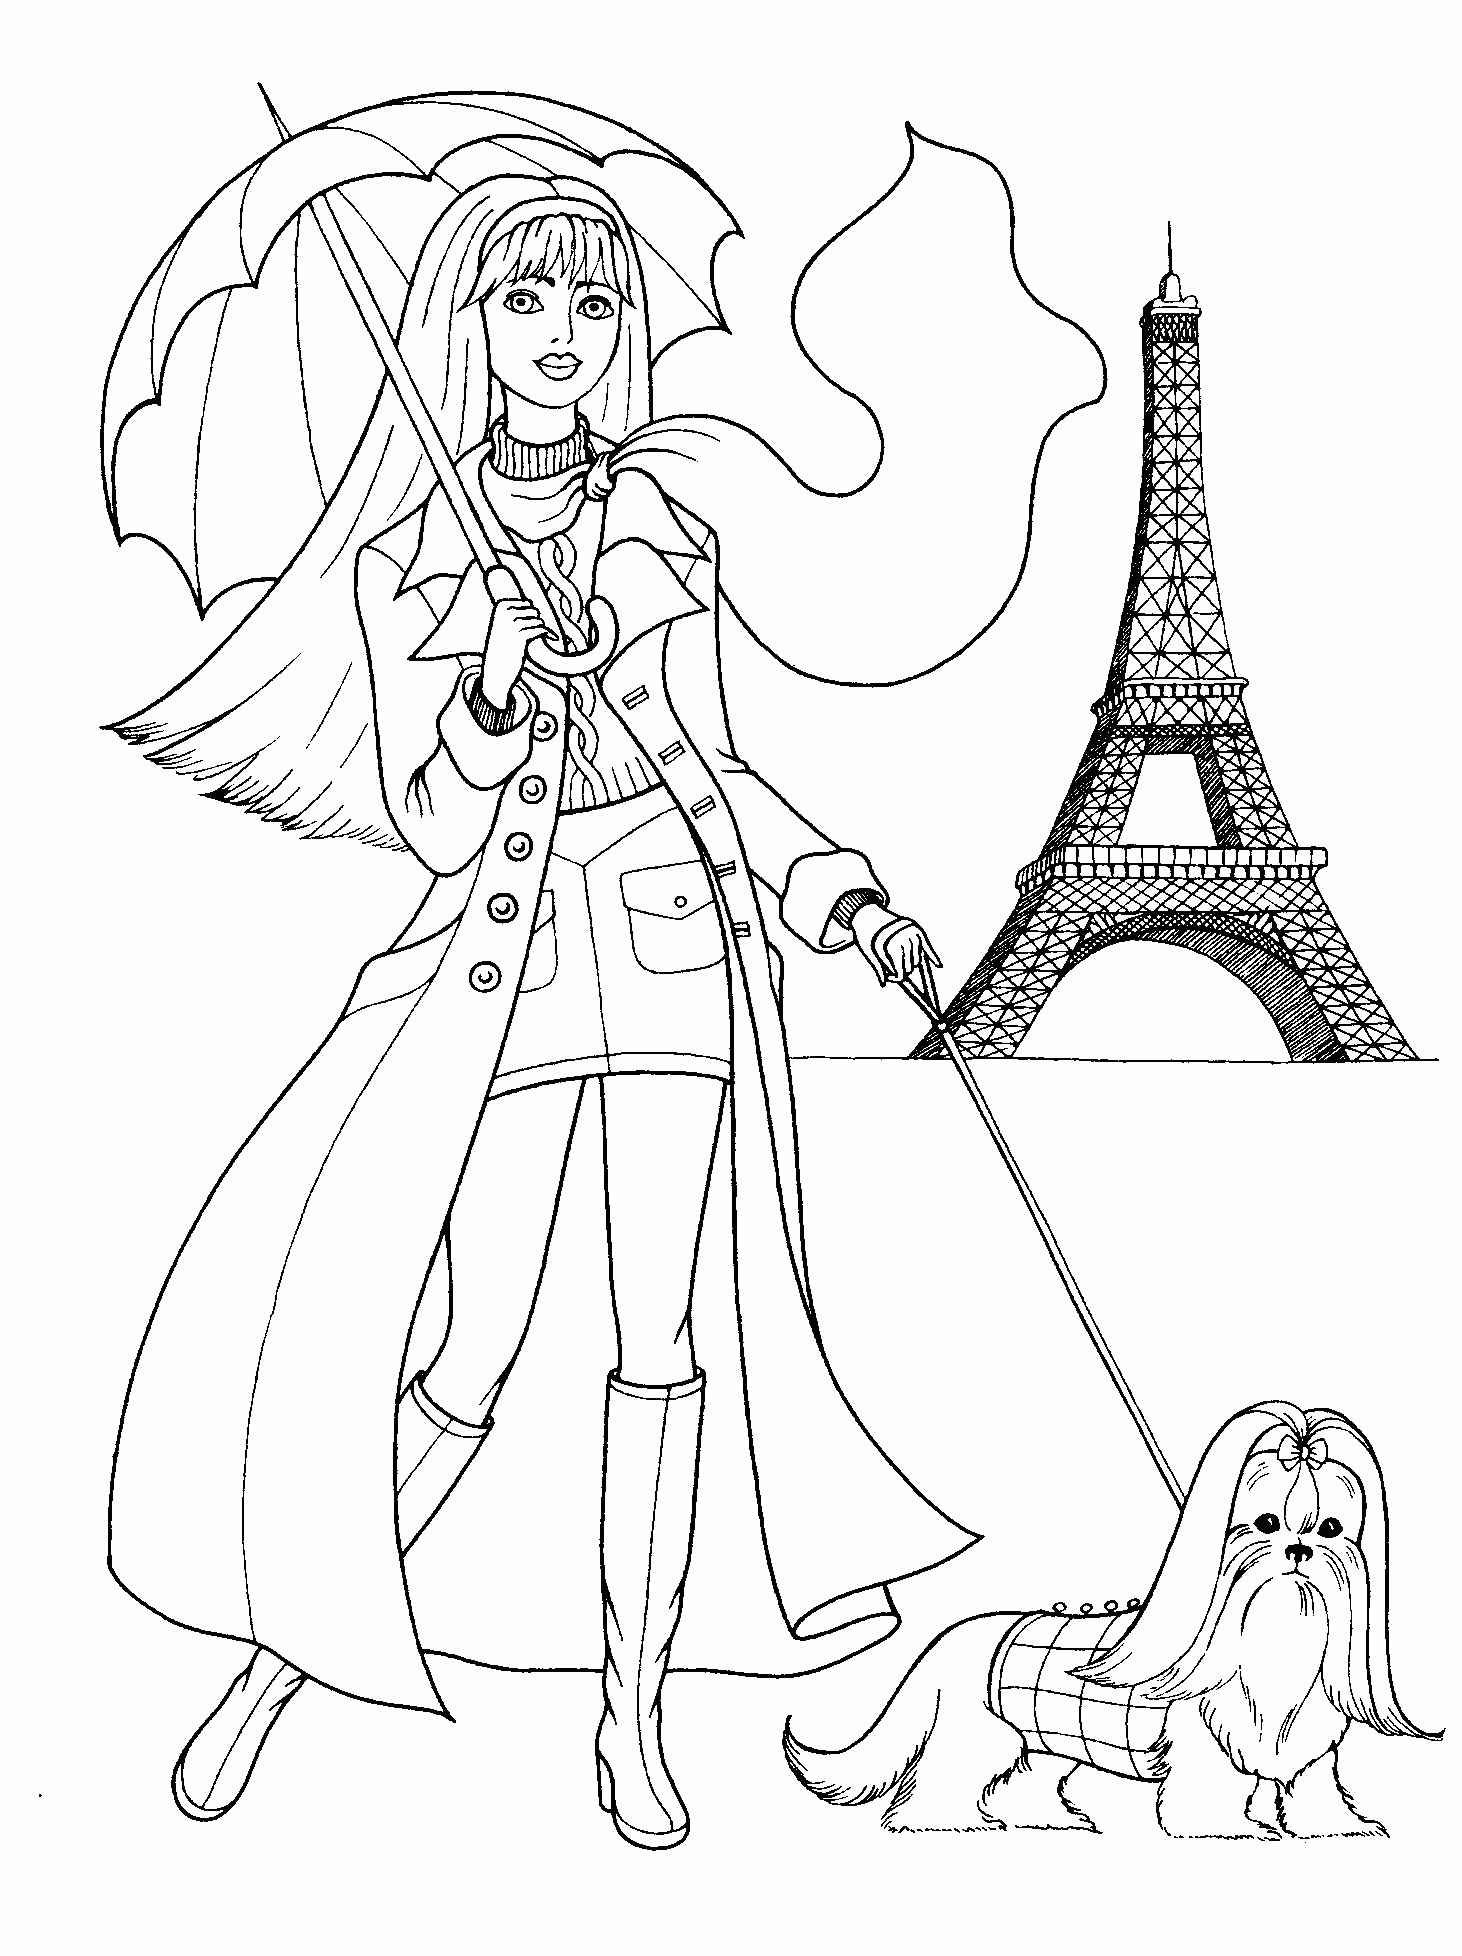 Ability Free Coloring Pages Of 12 Year Old Girls - Widetheme